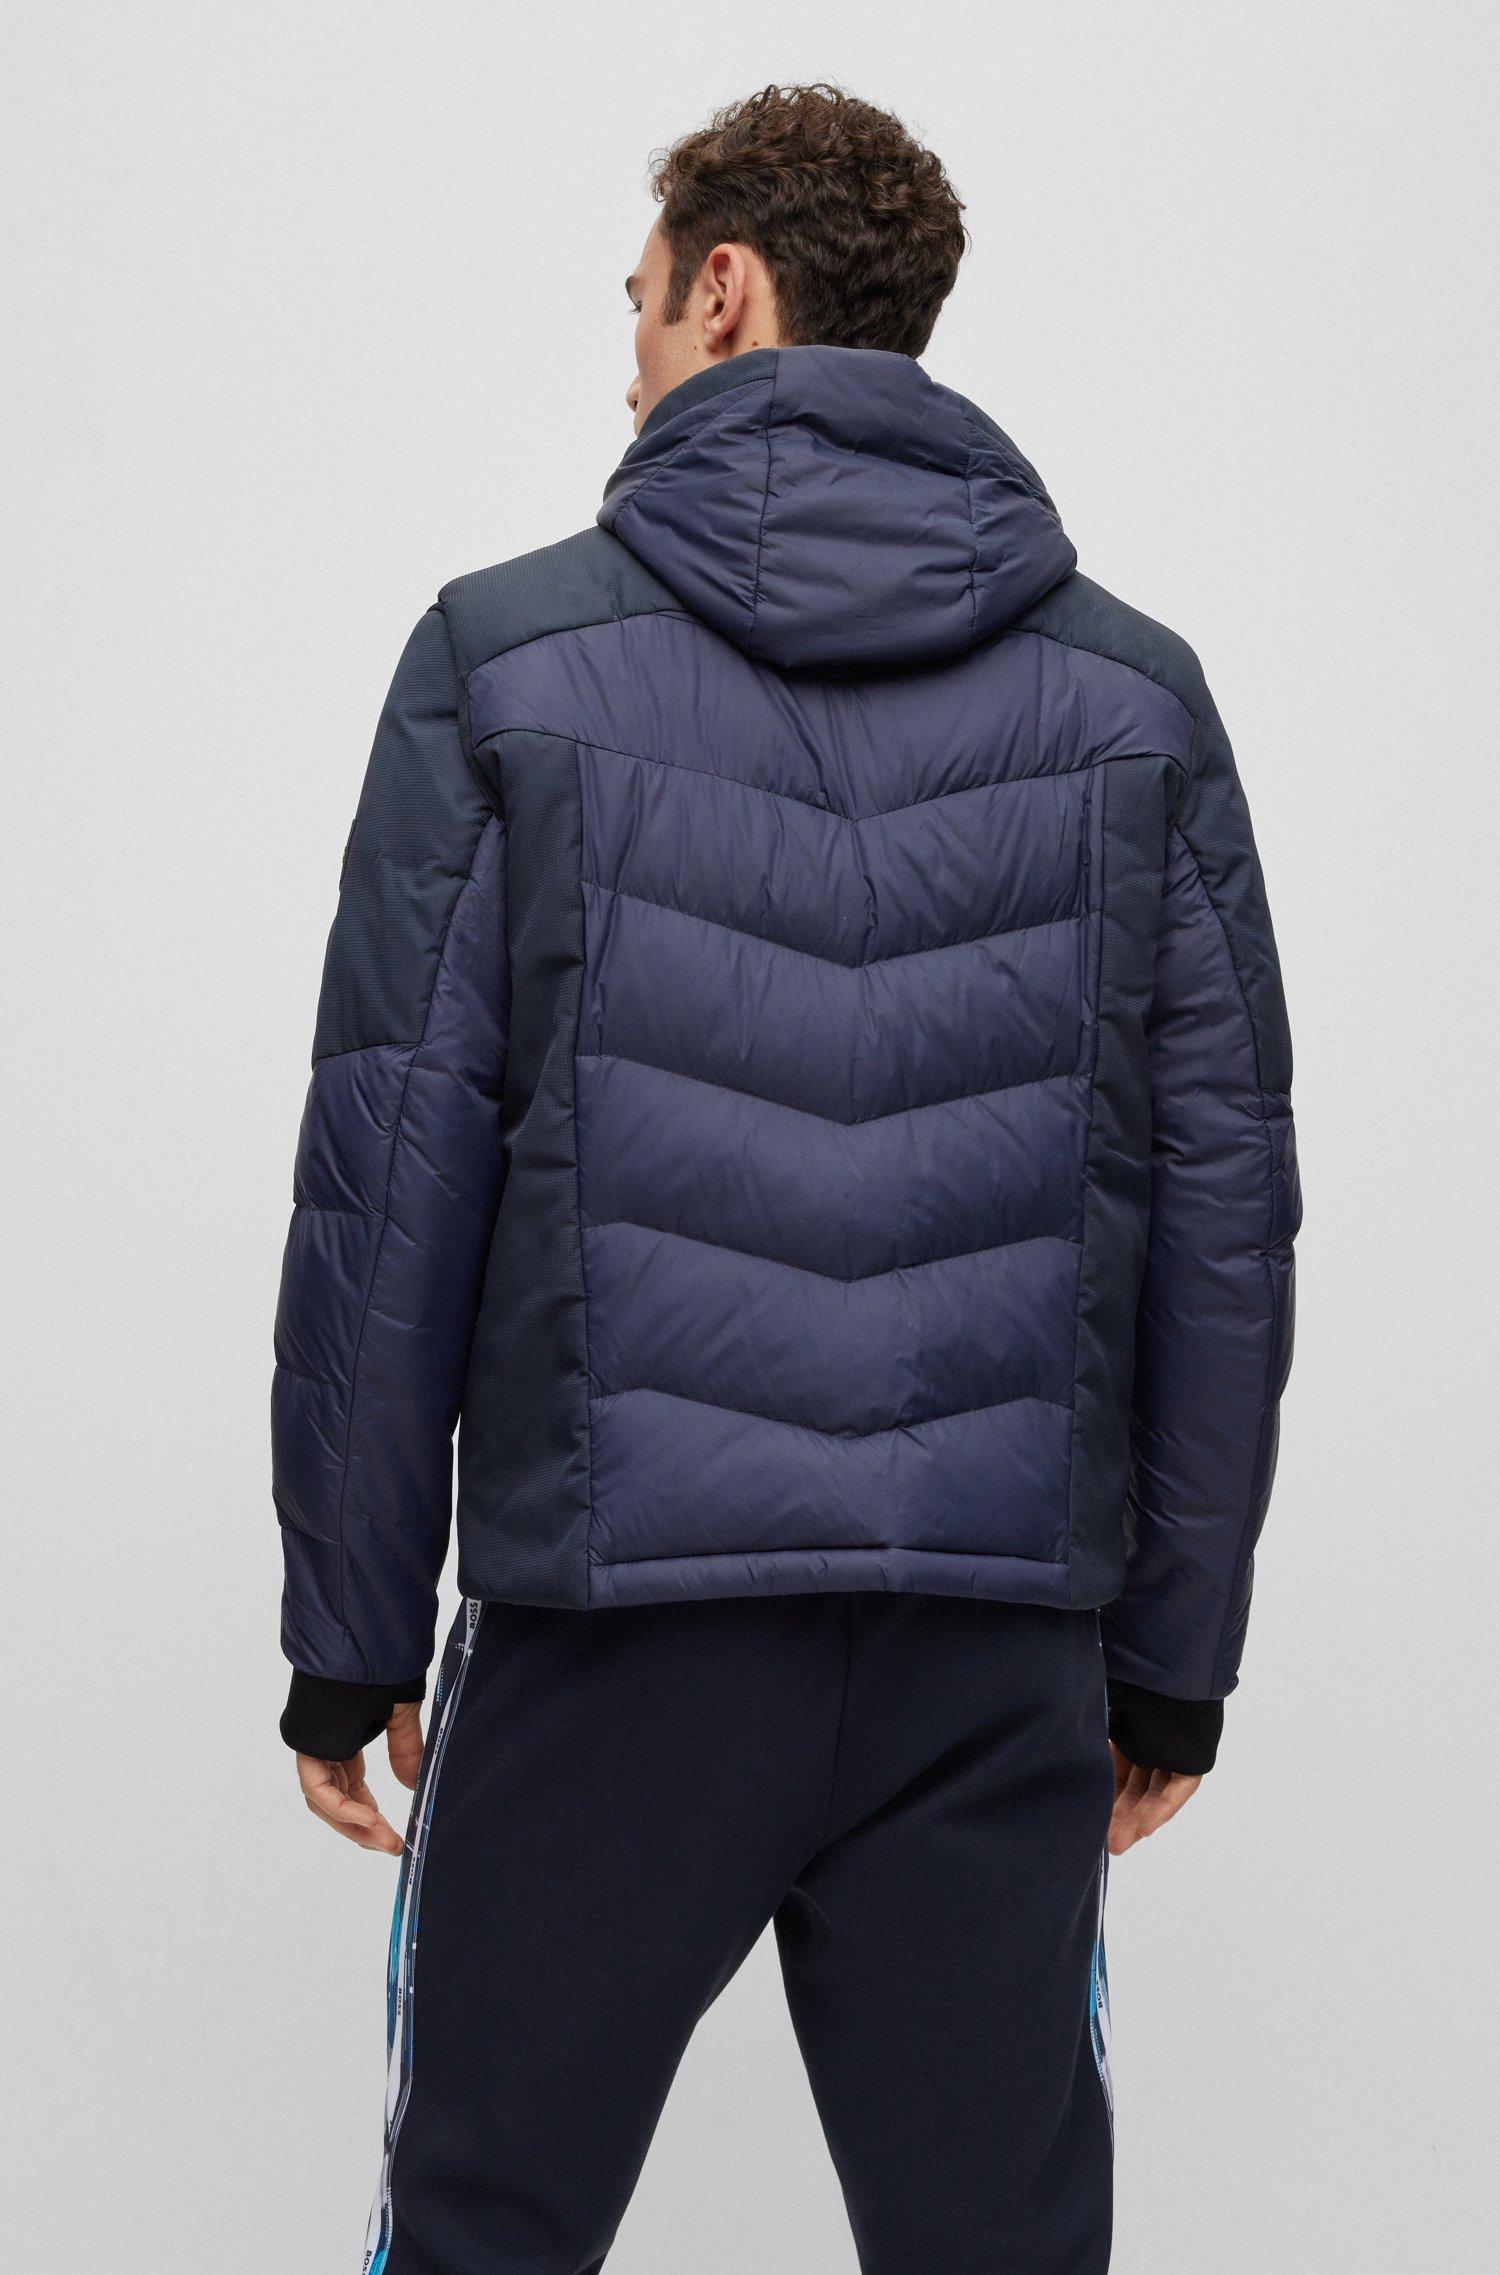 BOSS by HUGO BOSS Mixed-material Down Jacket With Detachable Sleeves And  Hood in Blue for Men | Lyst UK